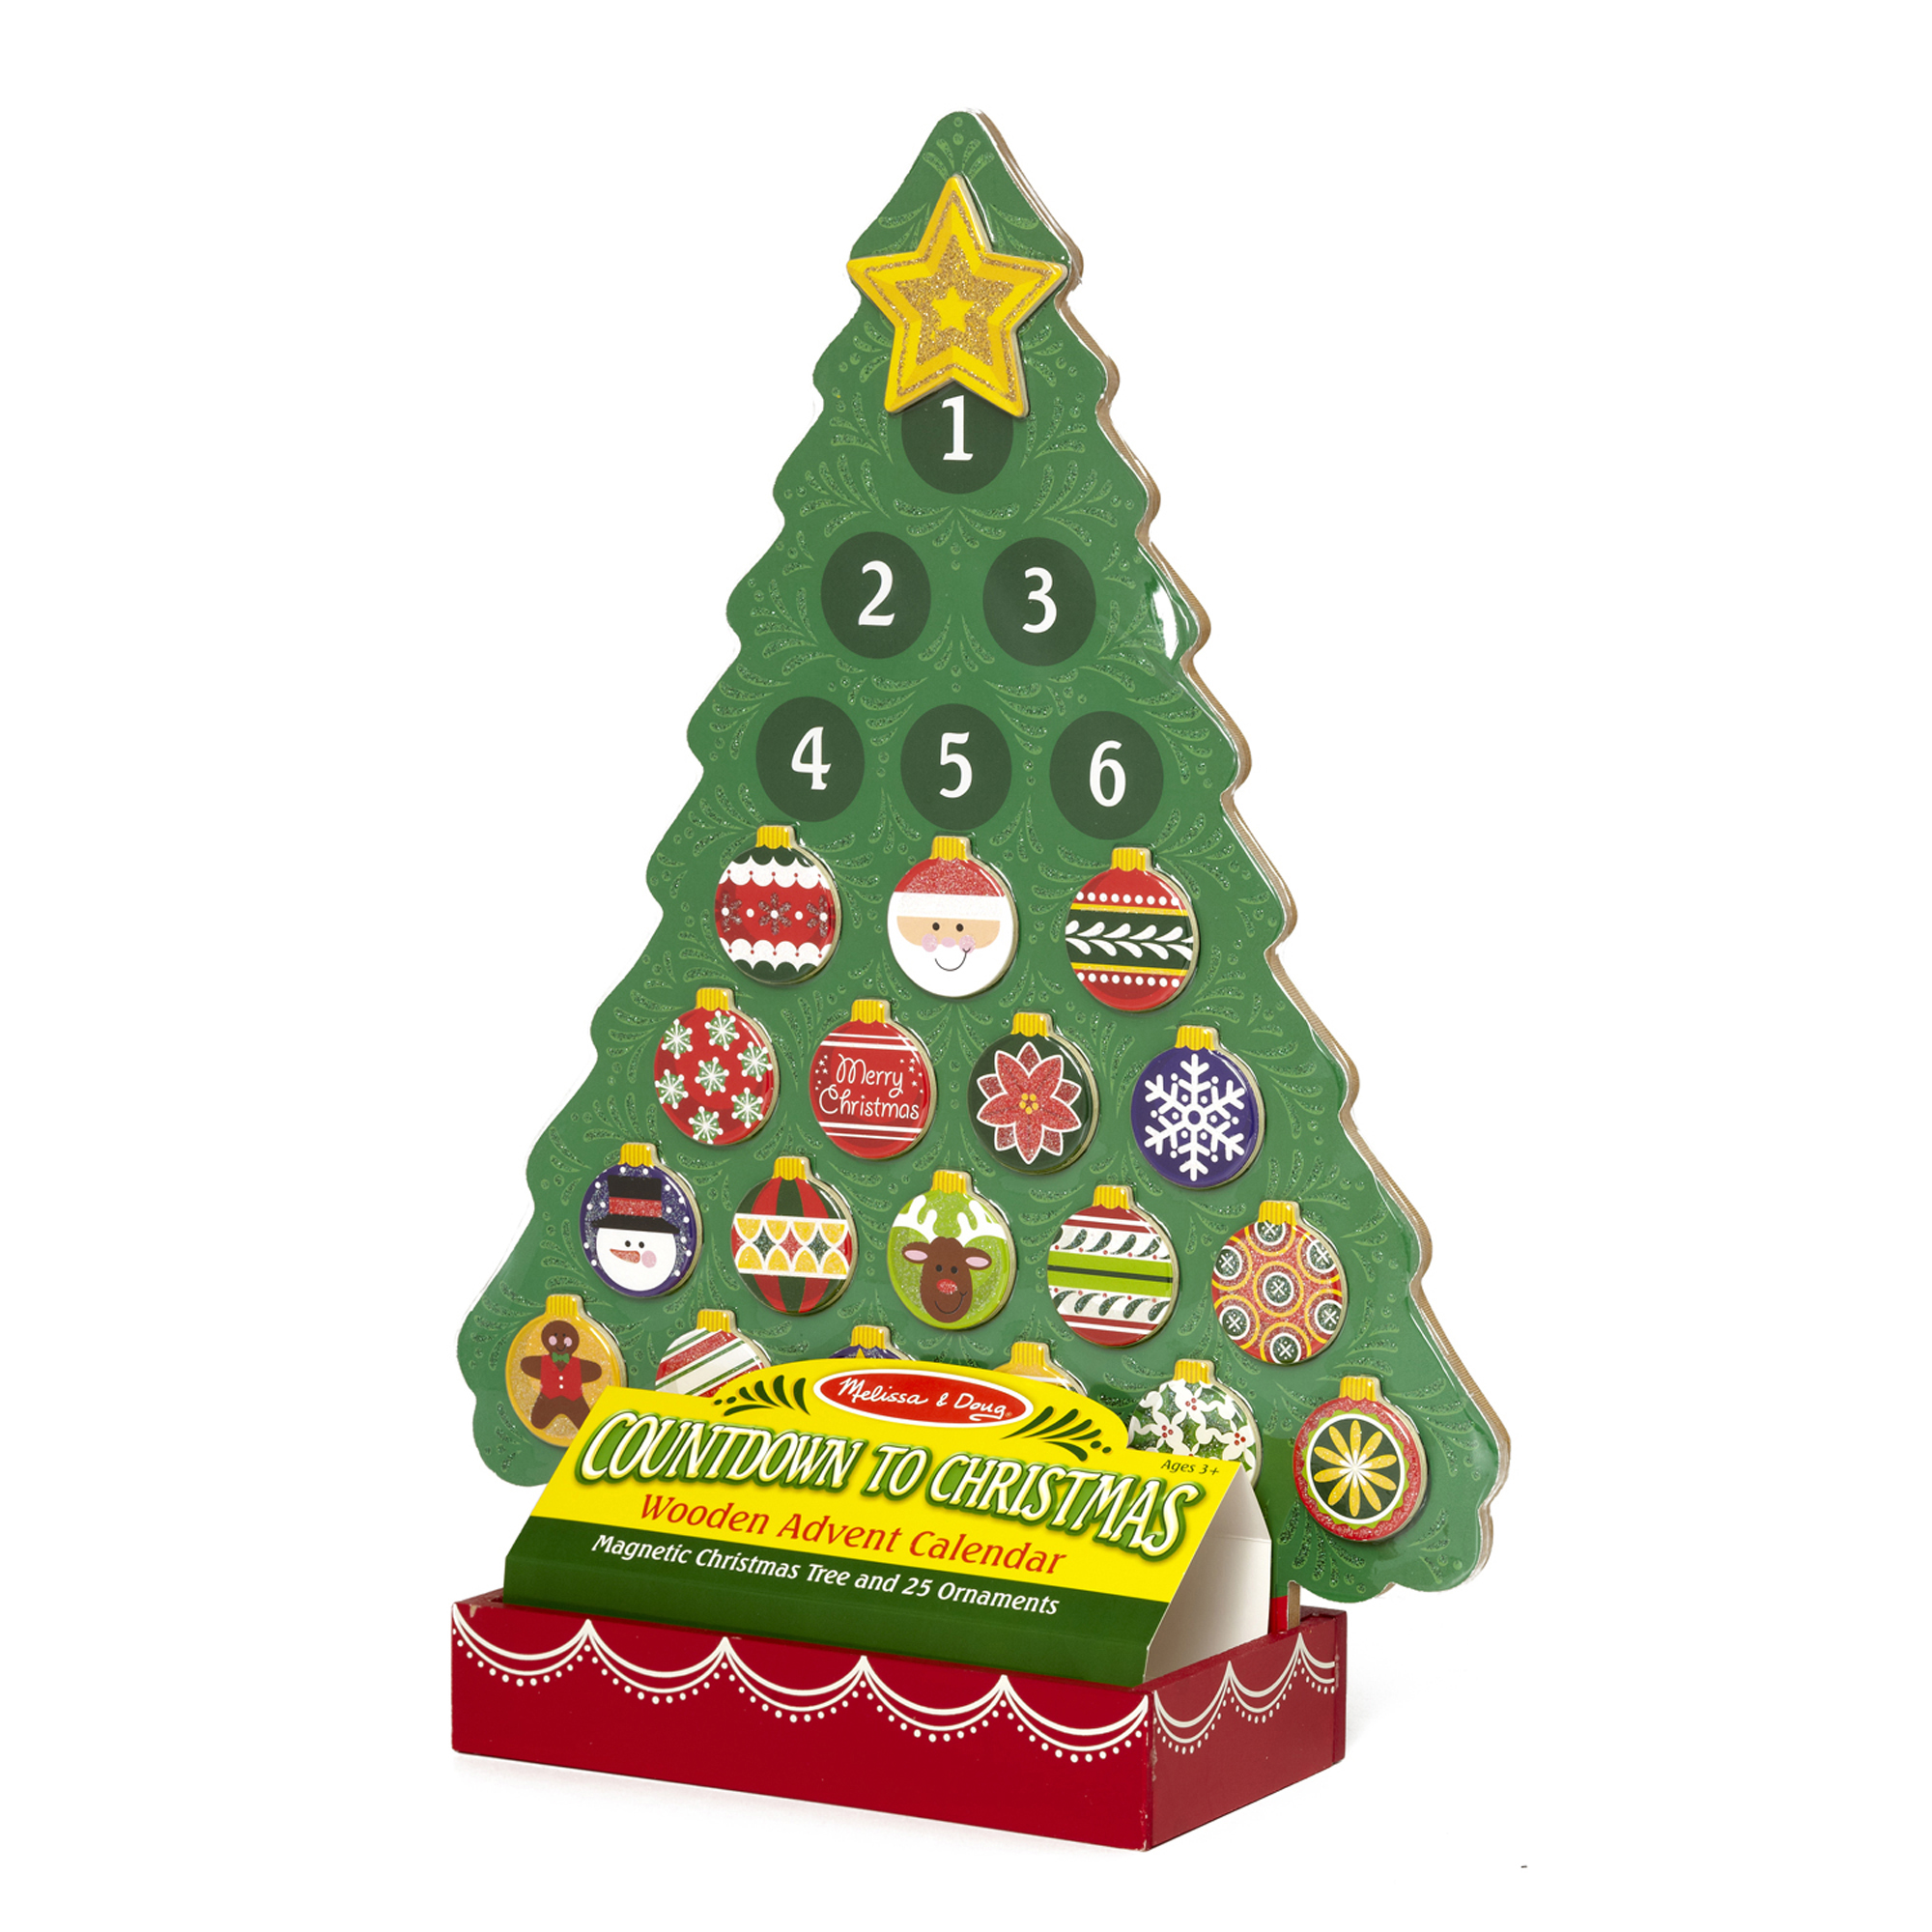 Countdown To Christmas Wooden Advent Calendar, Magnetic Tree, 25 Magnets